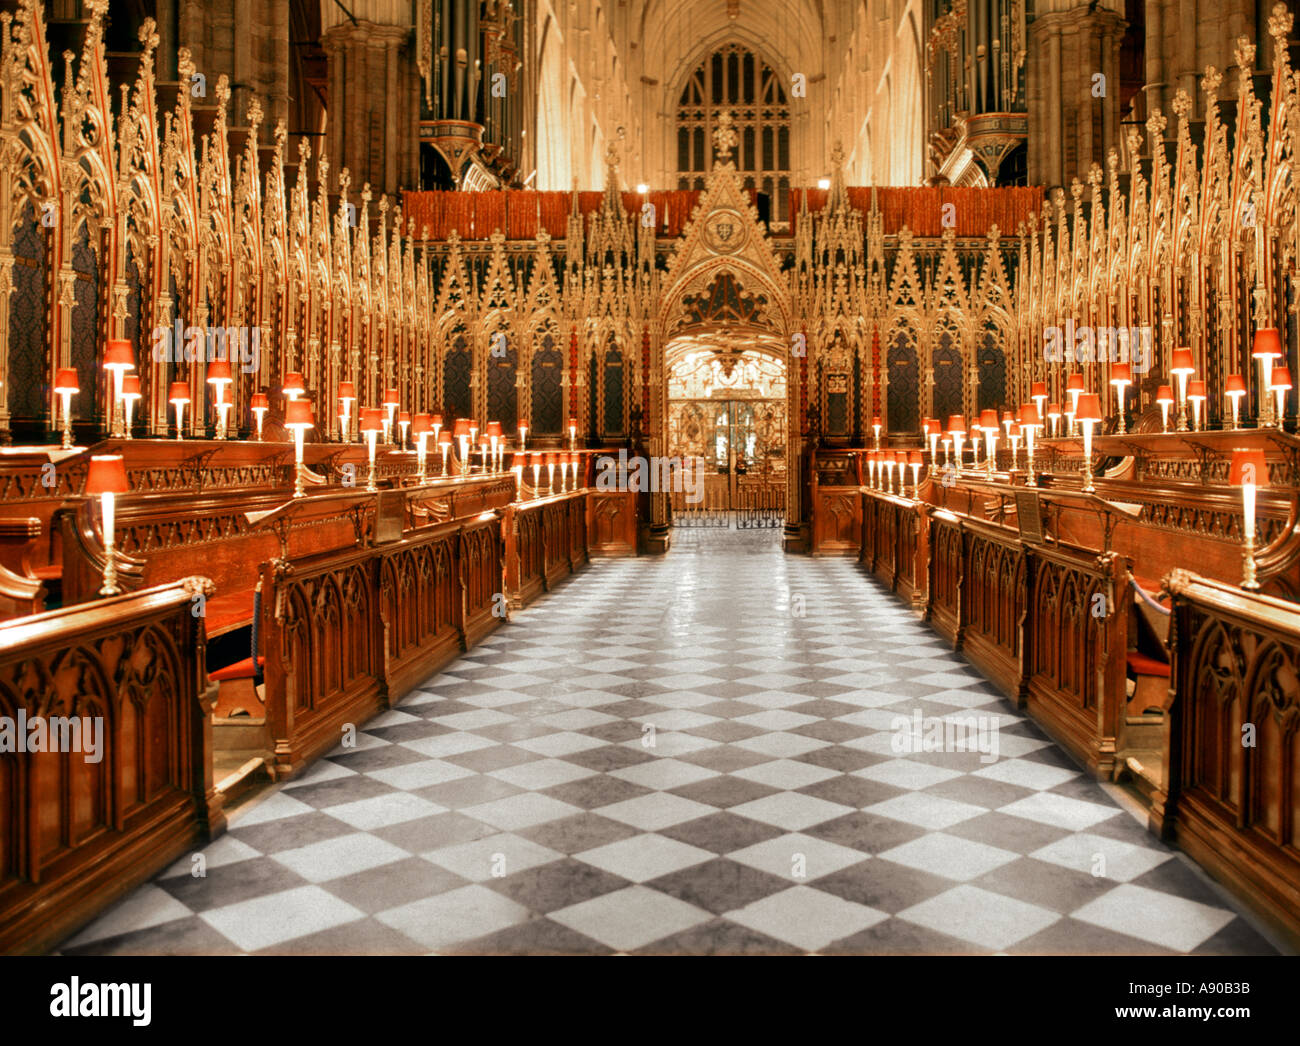 Westminster Abbey choir stalls part of historical interior of Collegiate Church of England Royal Peculiar Grade I Listed Building in London England UK Stock Photo